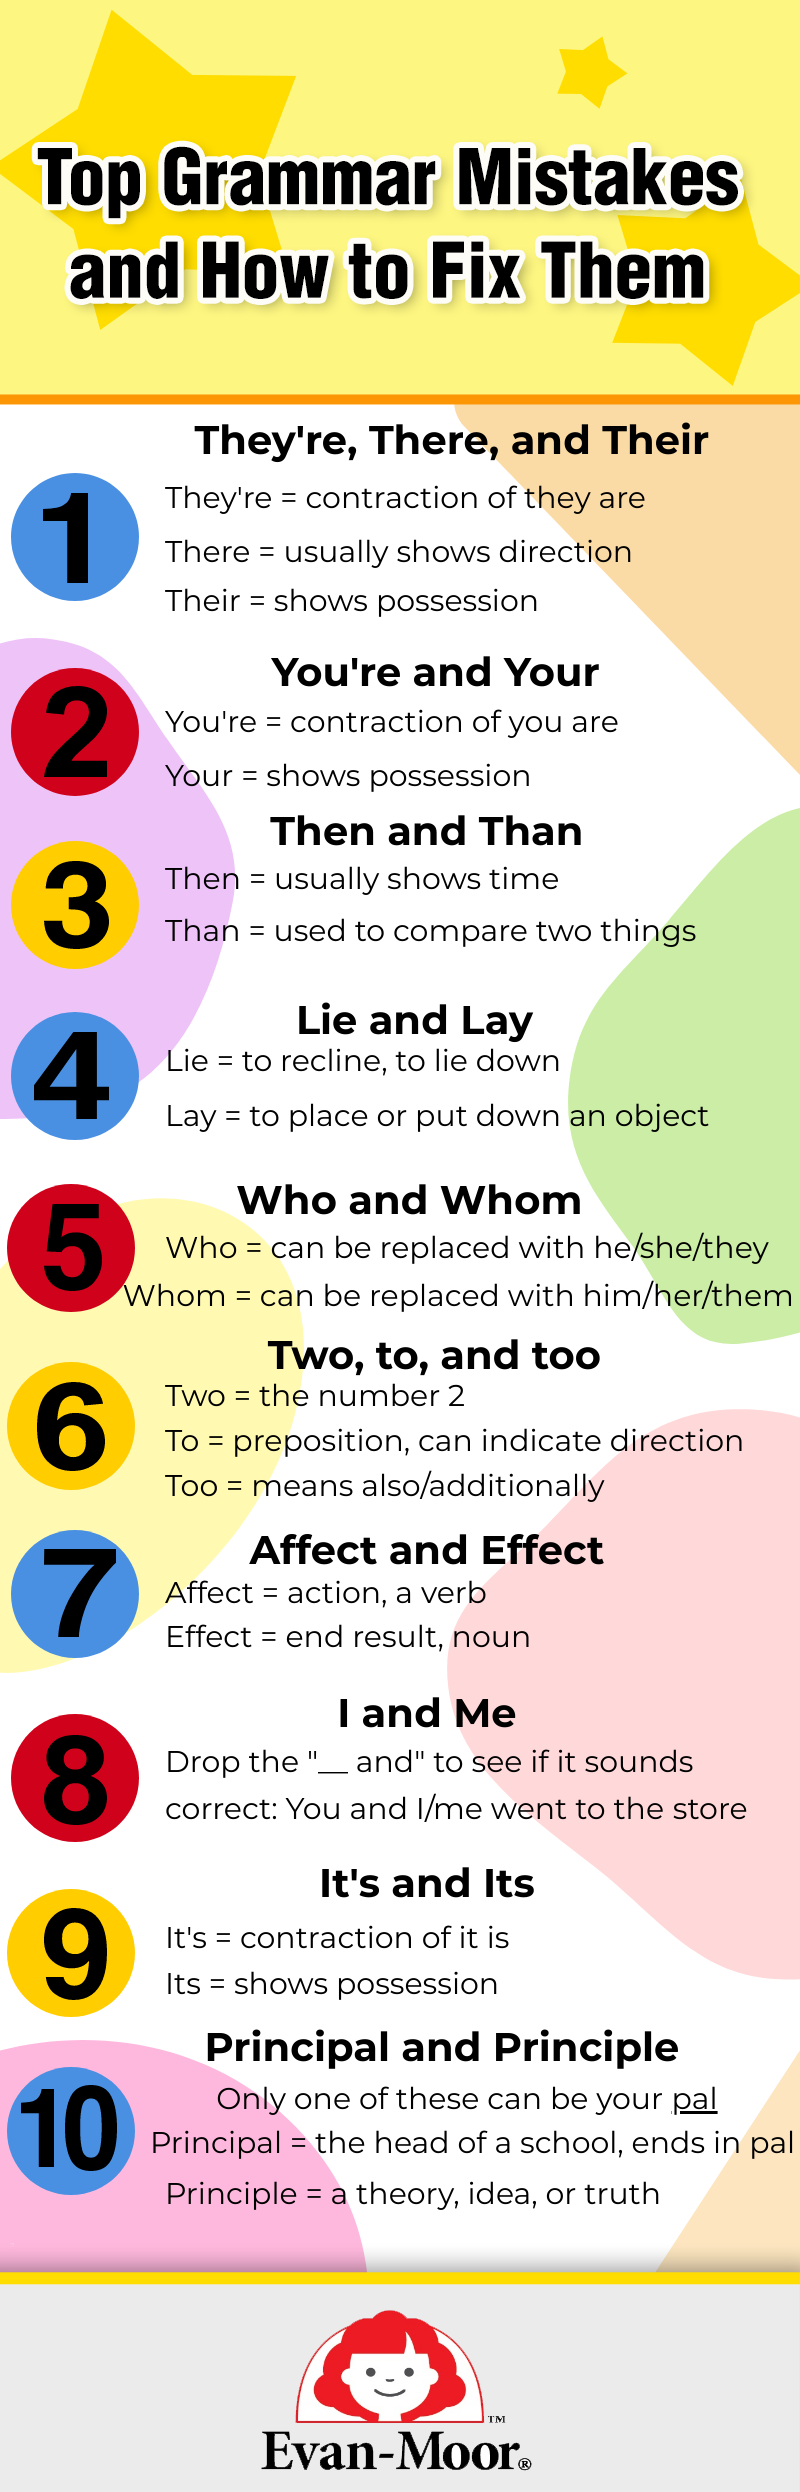 5 Tips to Help you Avoid English Mistakes - Genlish